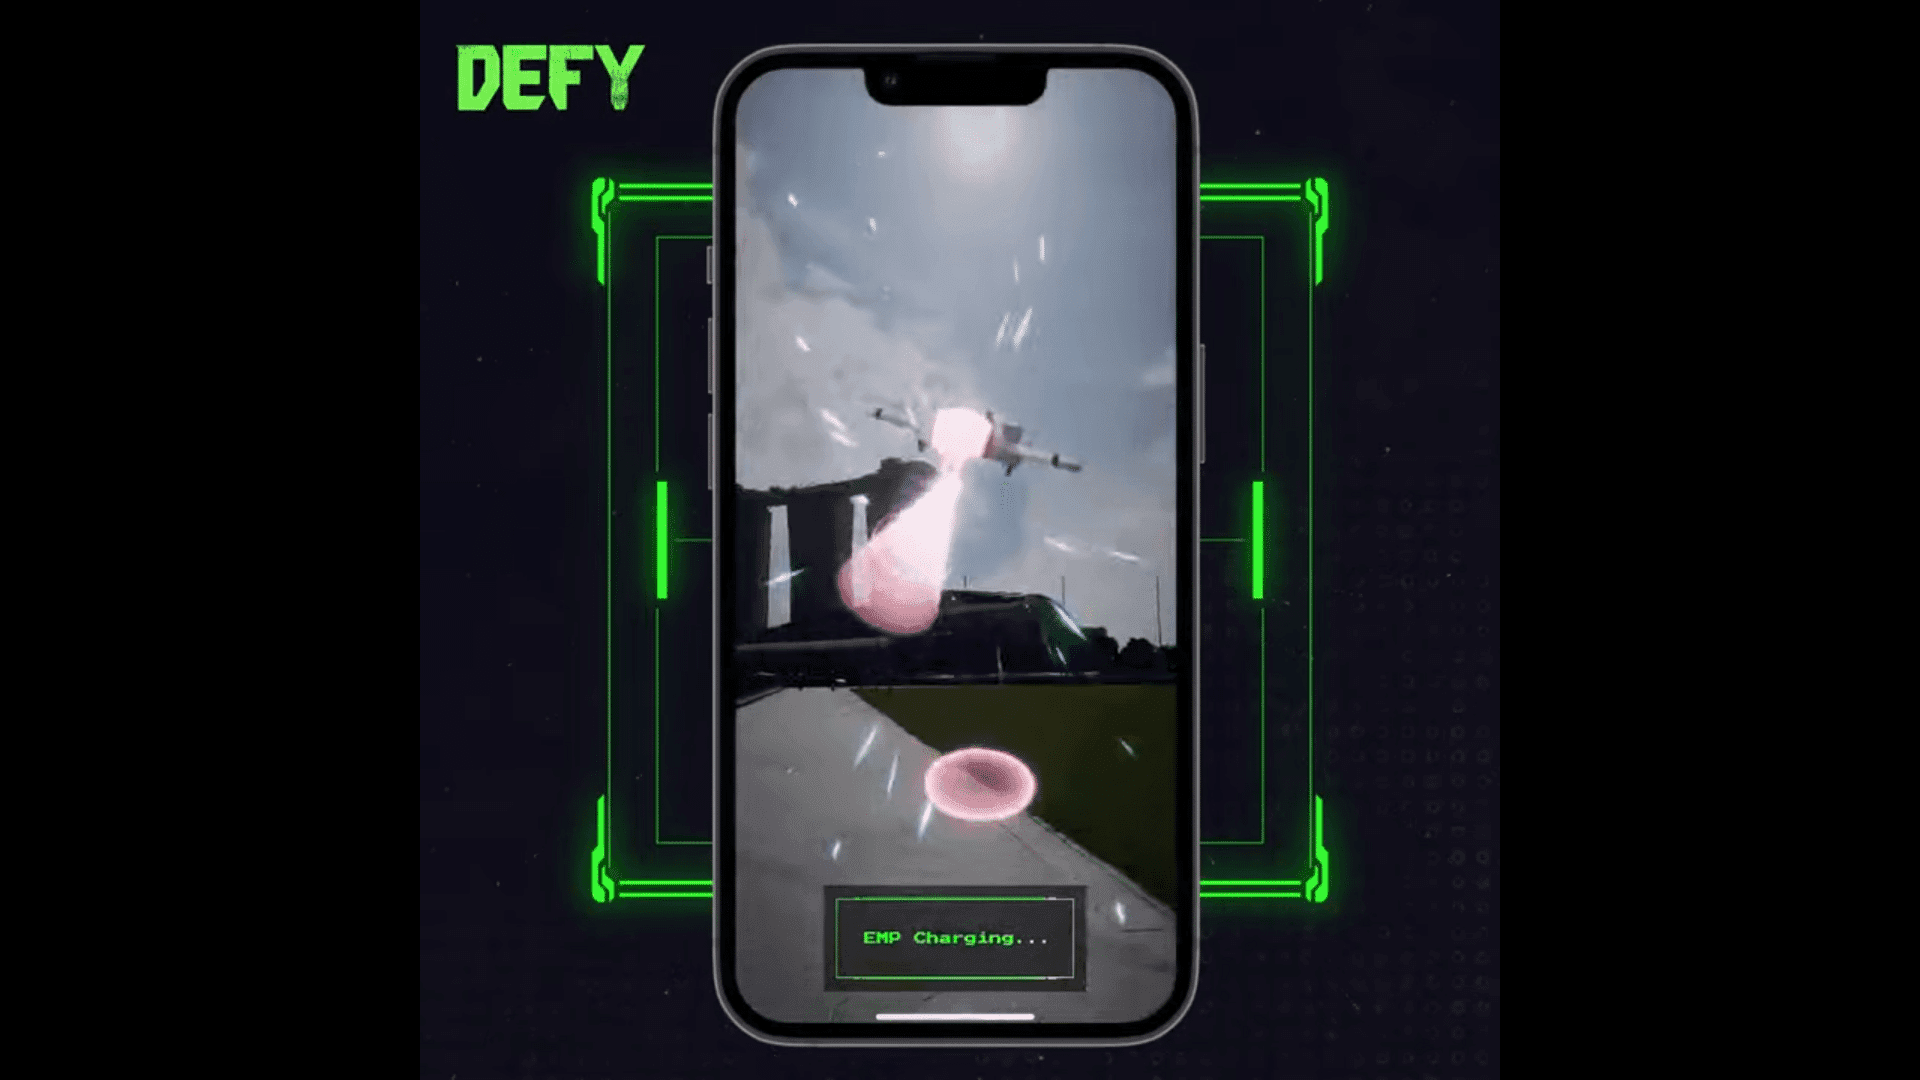 DEFY is a move-to-earn mobile game that combines elements of the virtual and physical worlds to provide an immersive metaverse experience.